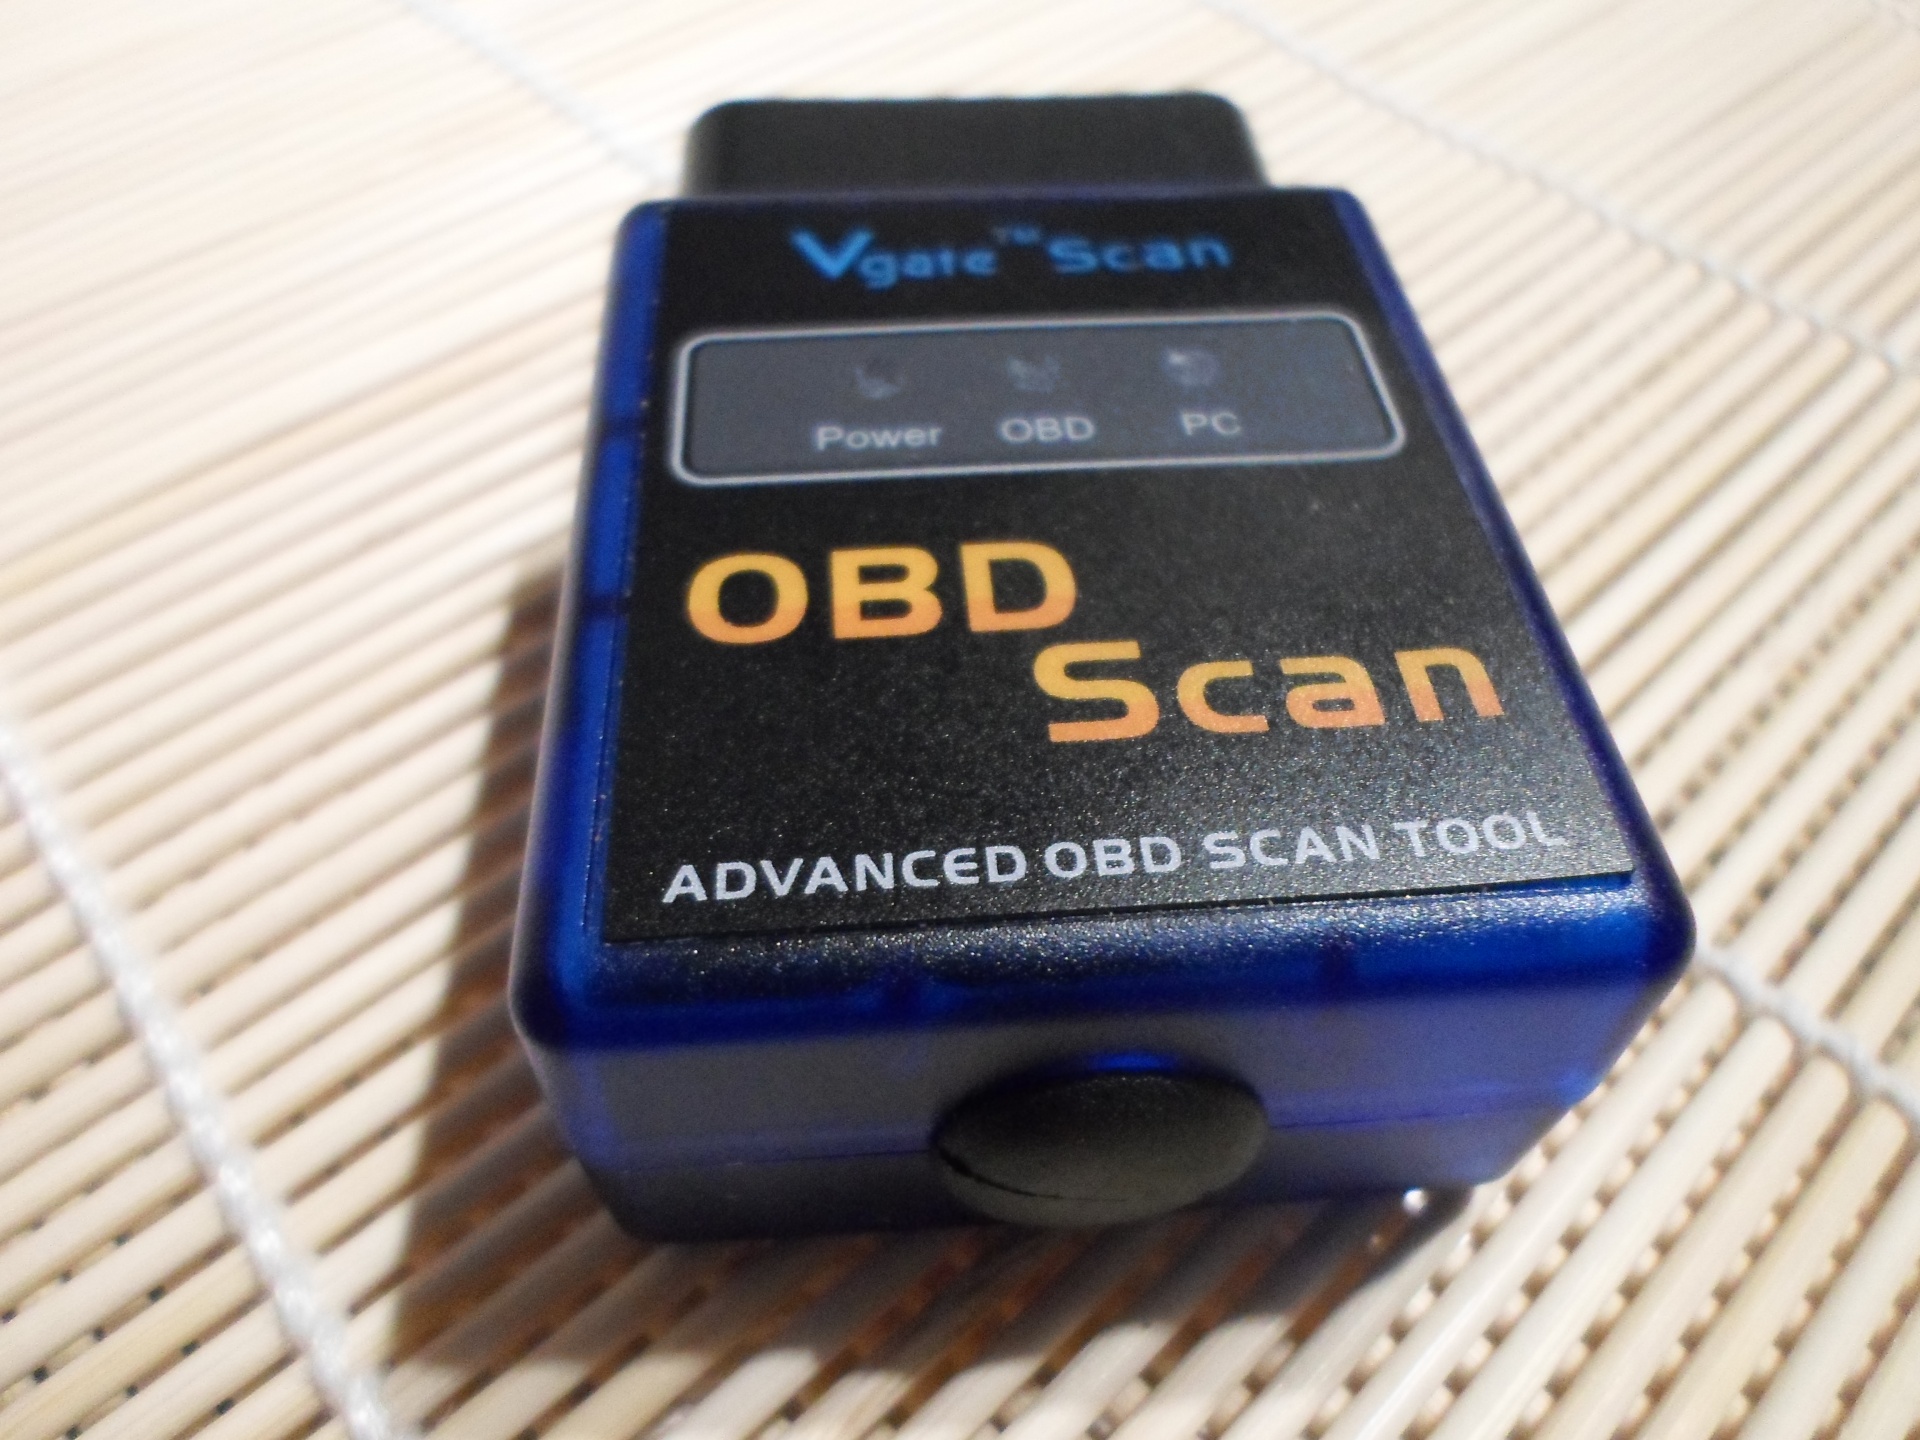 On-Board Diagnostics abbreviated as OBD, is a set of hardware diagnostic capabilities that is embedded in most thermal engine vehicles produced in the 2000s